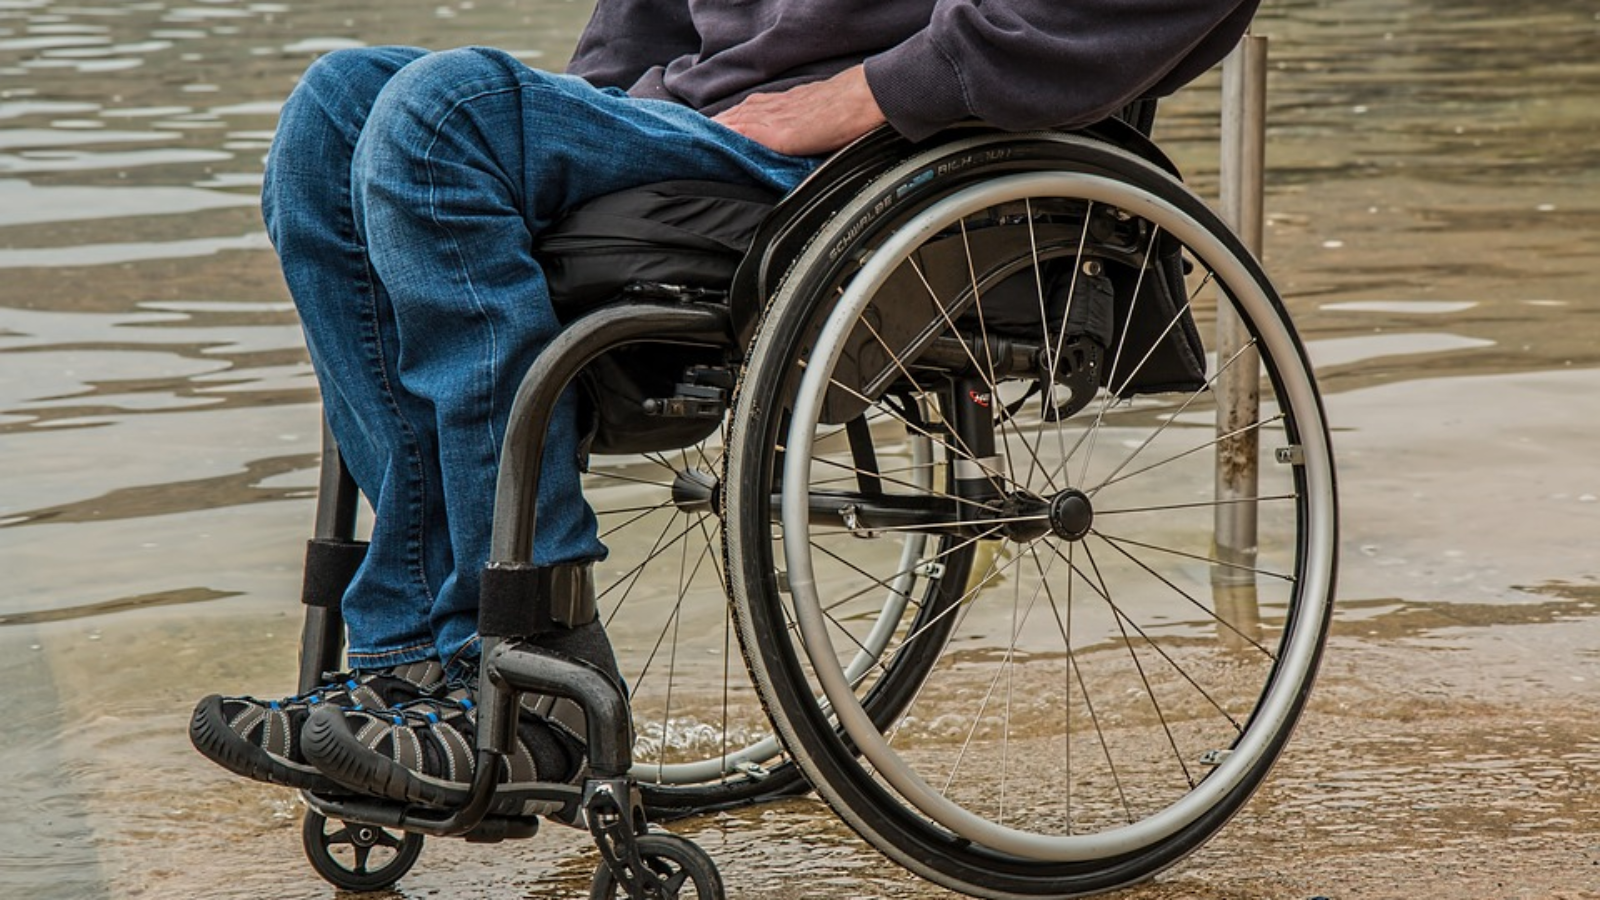 A person in a wheelchair who suffered a personal injury disability.